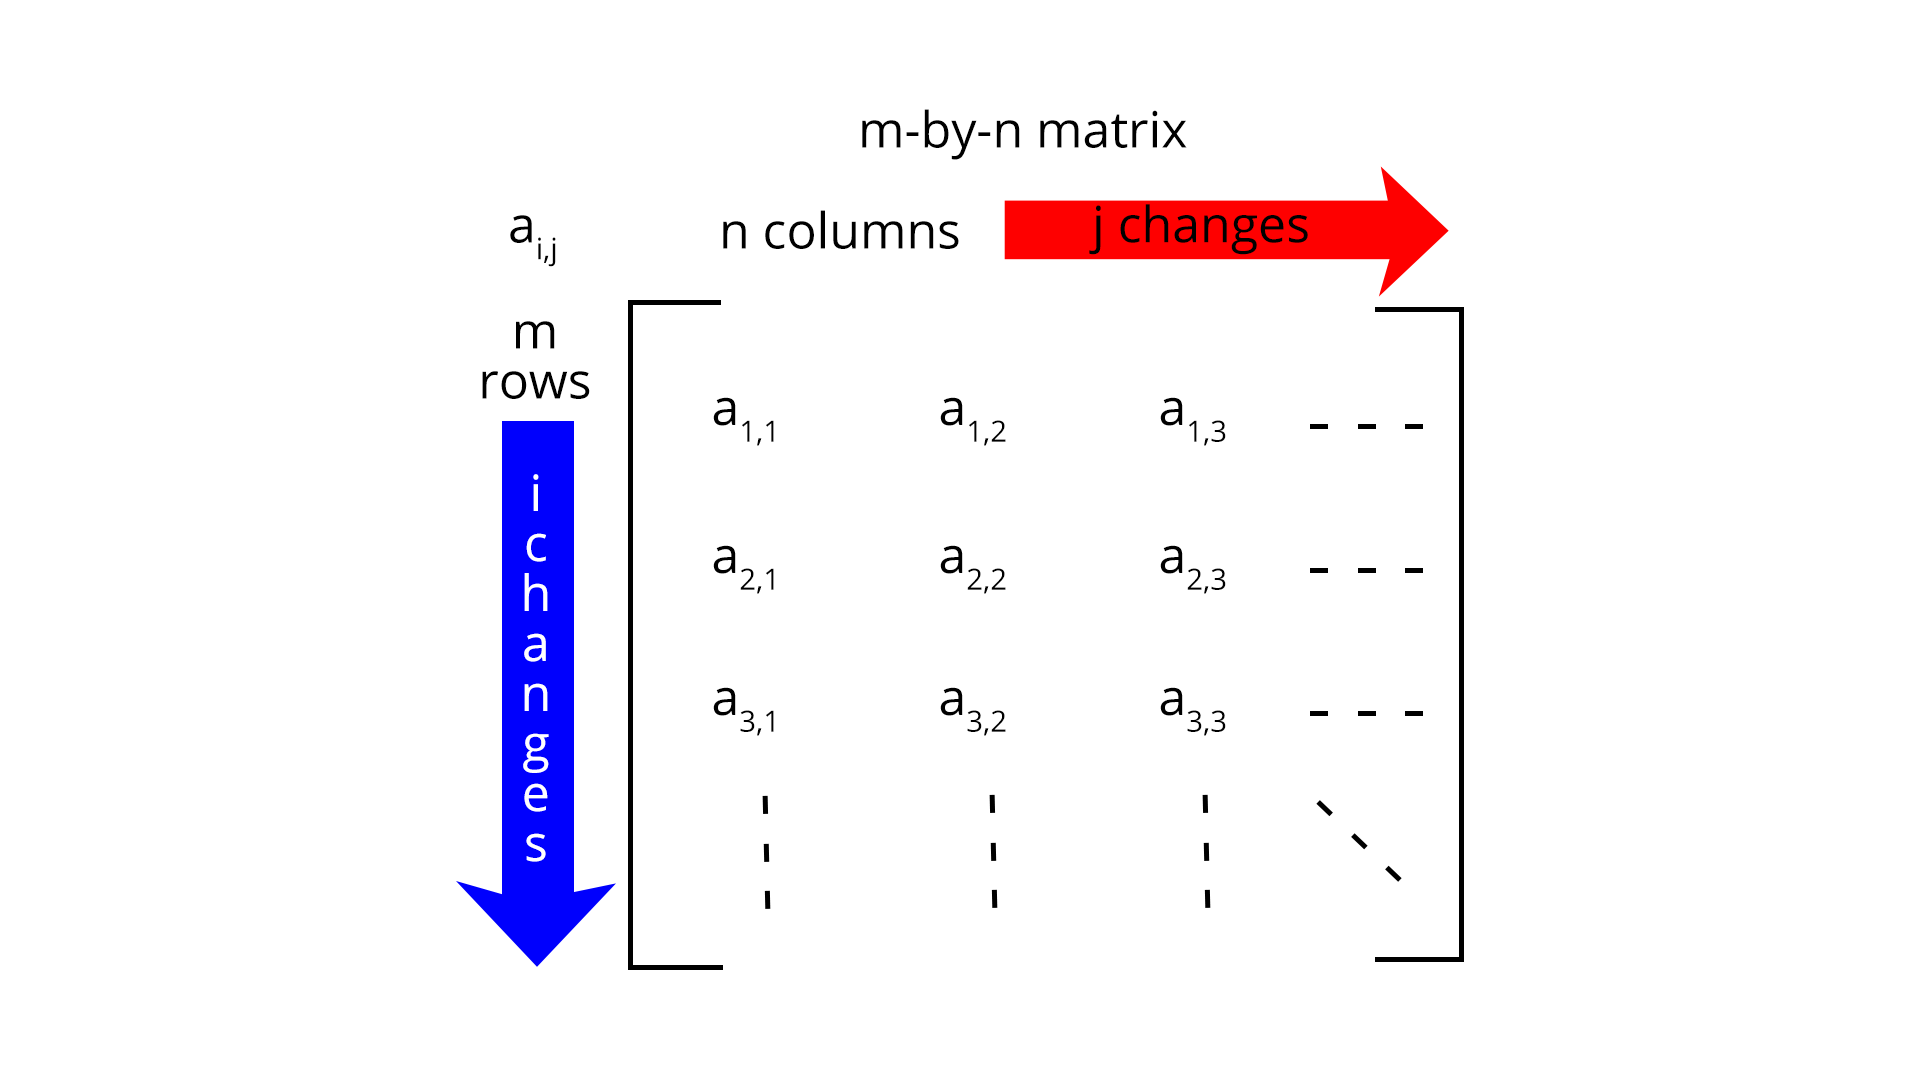 Matrix dimension - Each element of a matrix is often denoted by a variable with two subscripts.